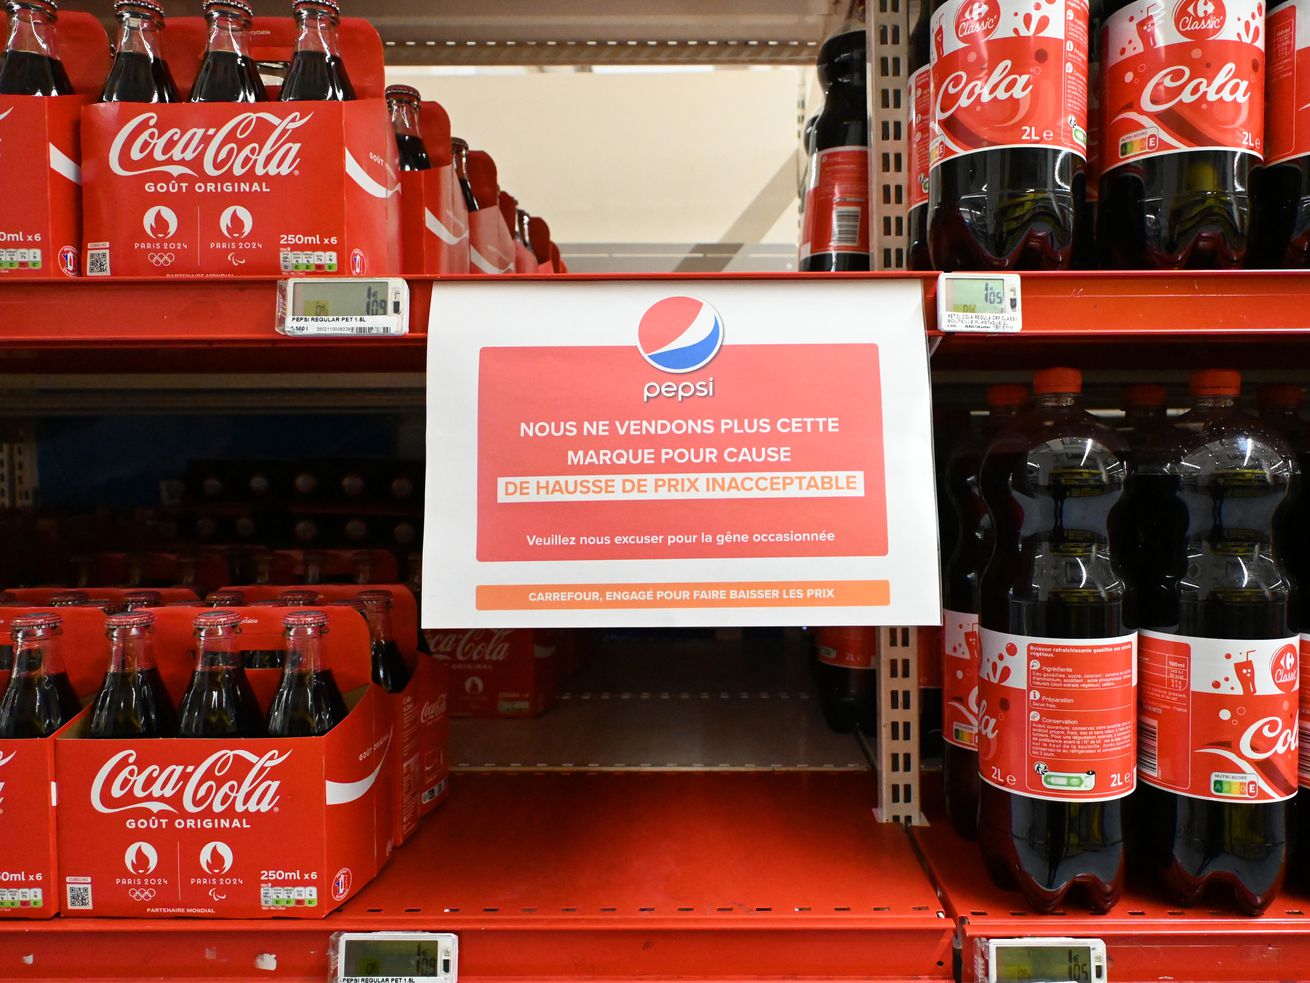 Grocery shelves with Coca-Cola bottles, with an empty space where Pepsi’s products would typically go. A sign written in French informs customers that some PepsiCo products are not available due to unacceptable price increases.